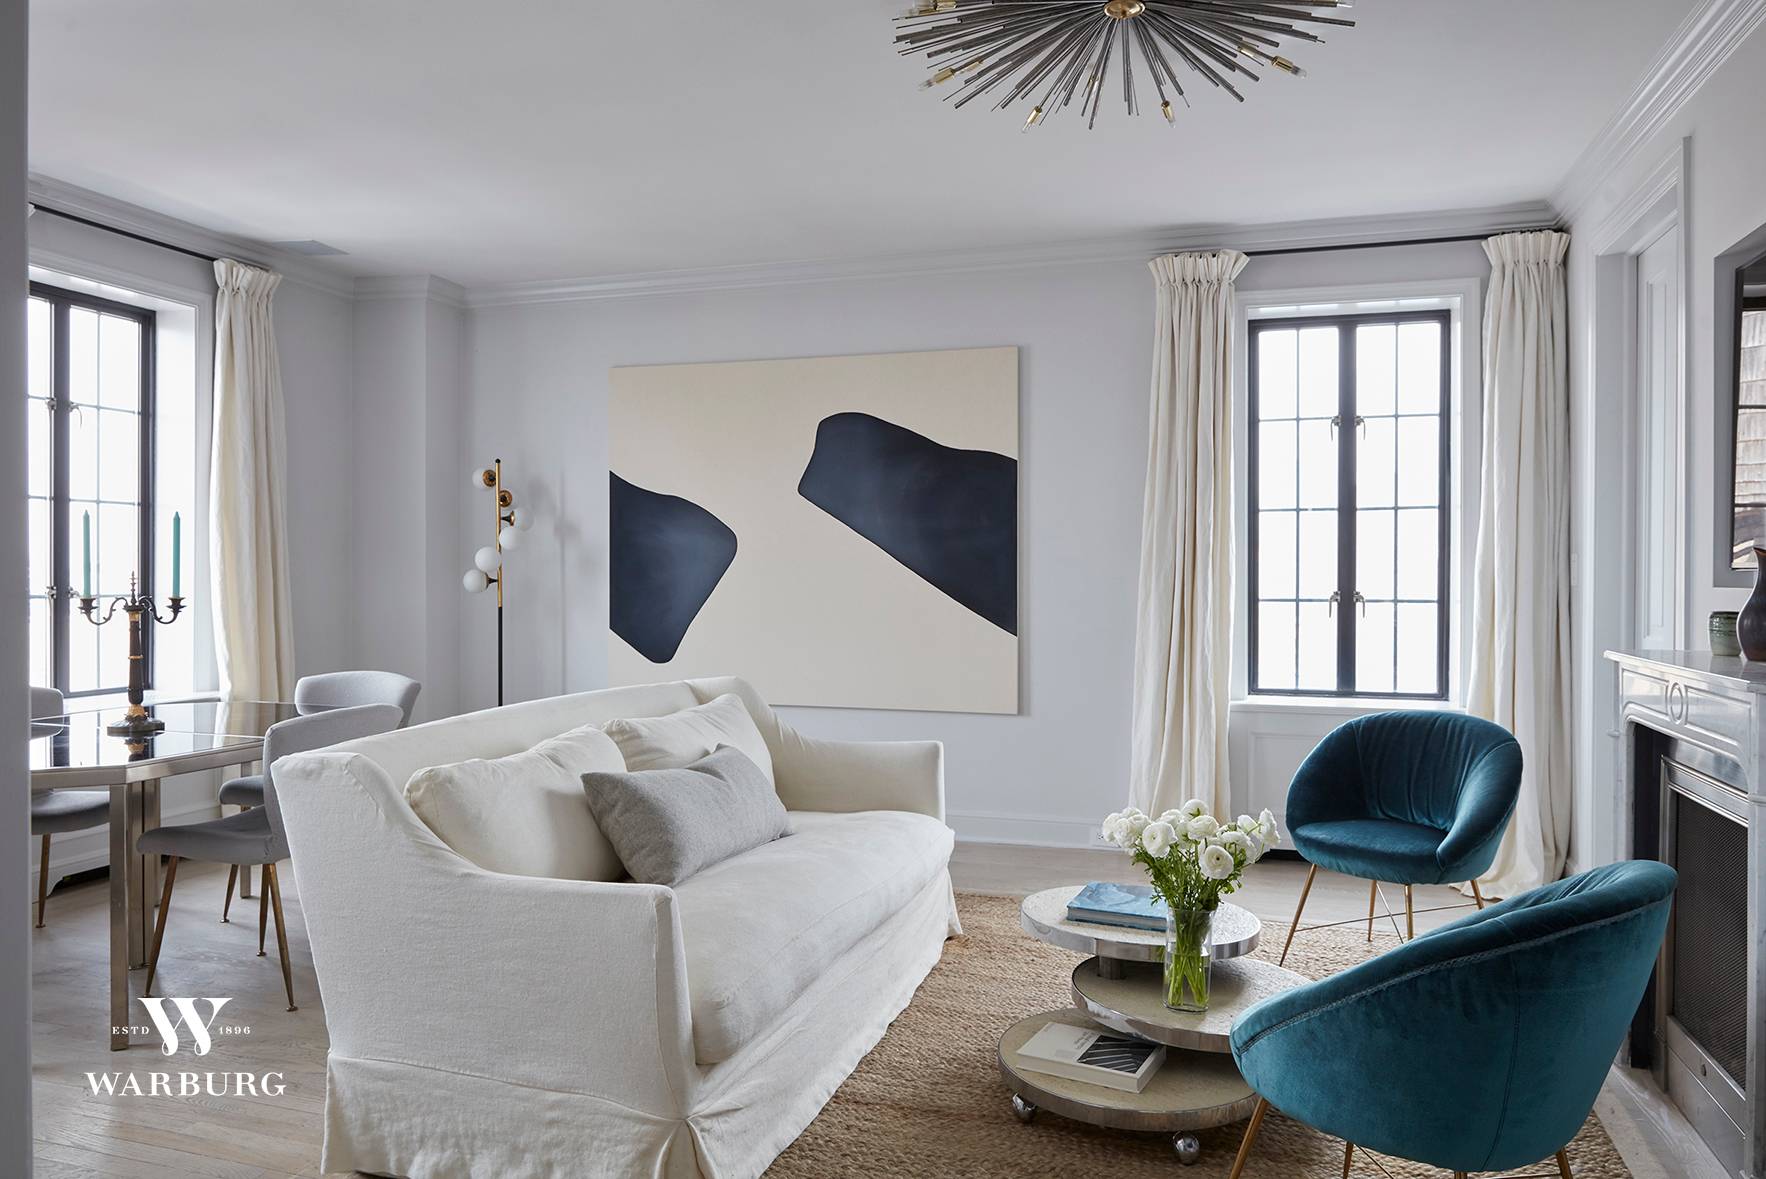 At the coveted cross section of Chelsea, West Village, and Greenwich Village, this airy two bedroom and two bathroom Pre War apartment boasts both form and function.